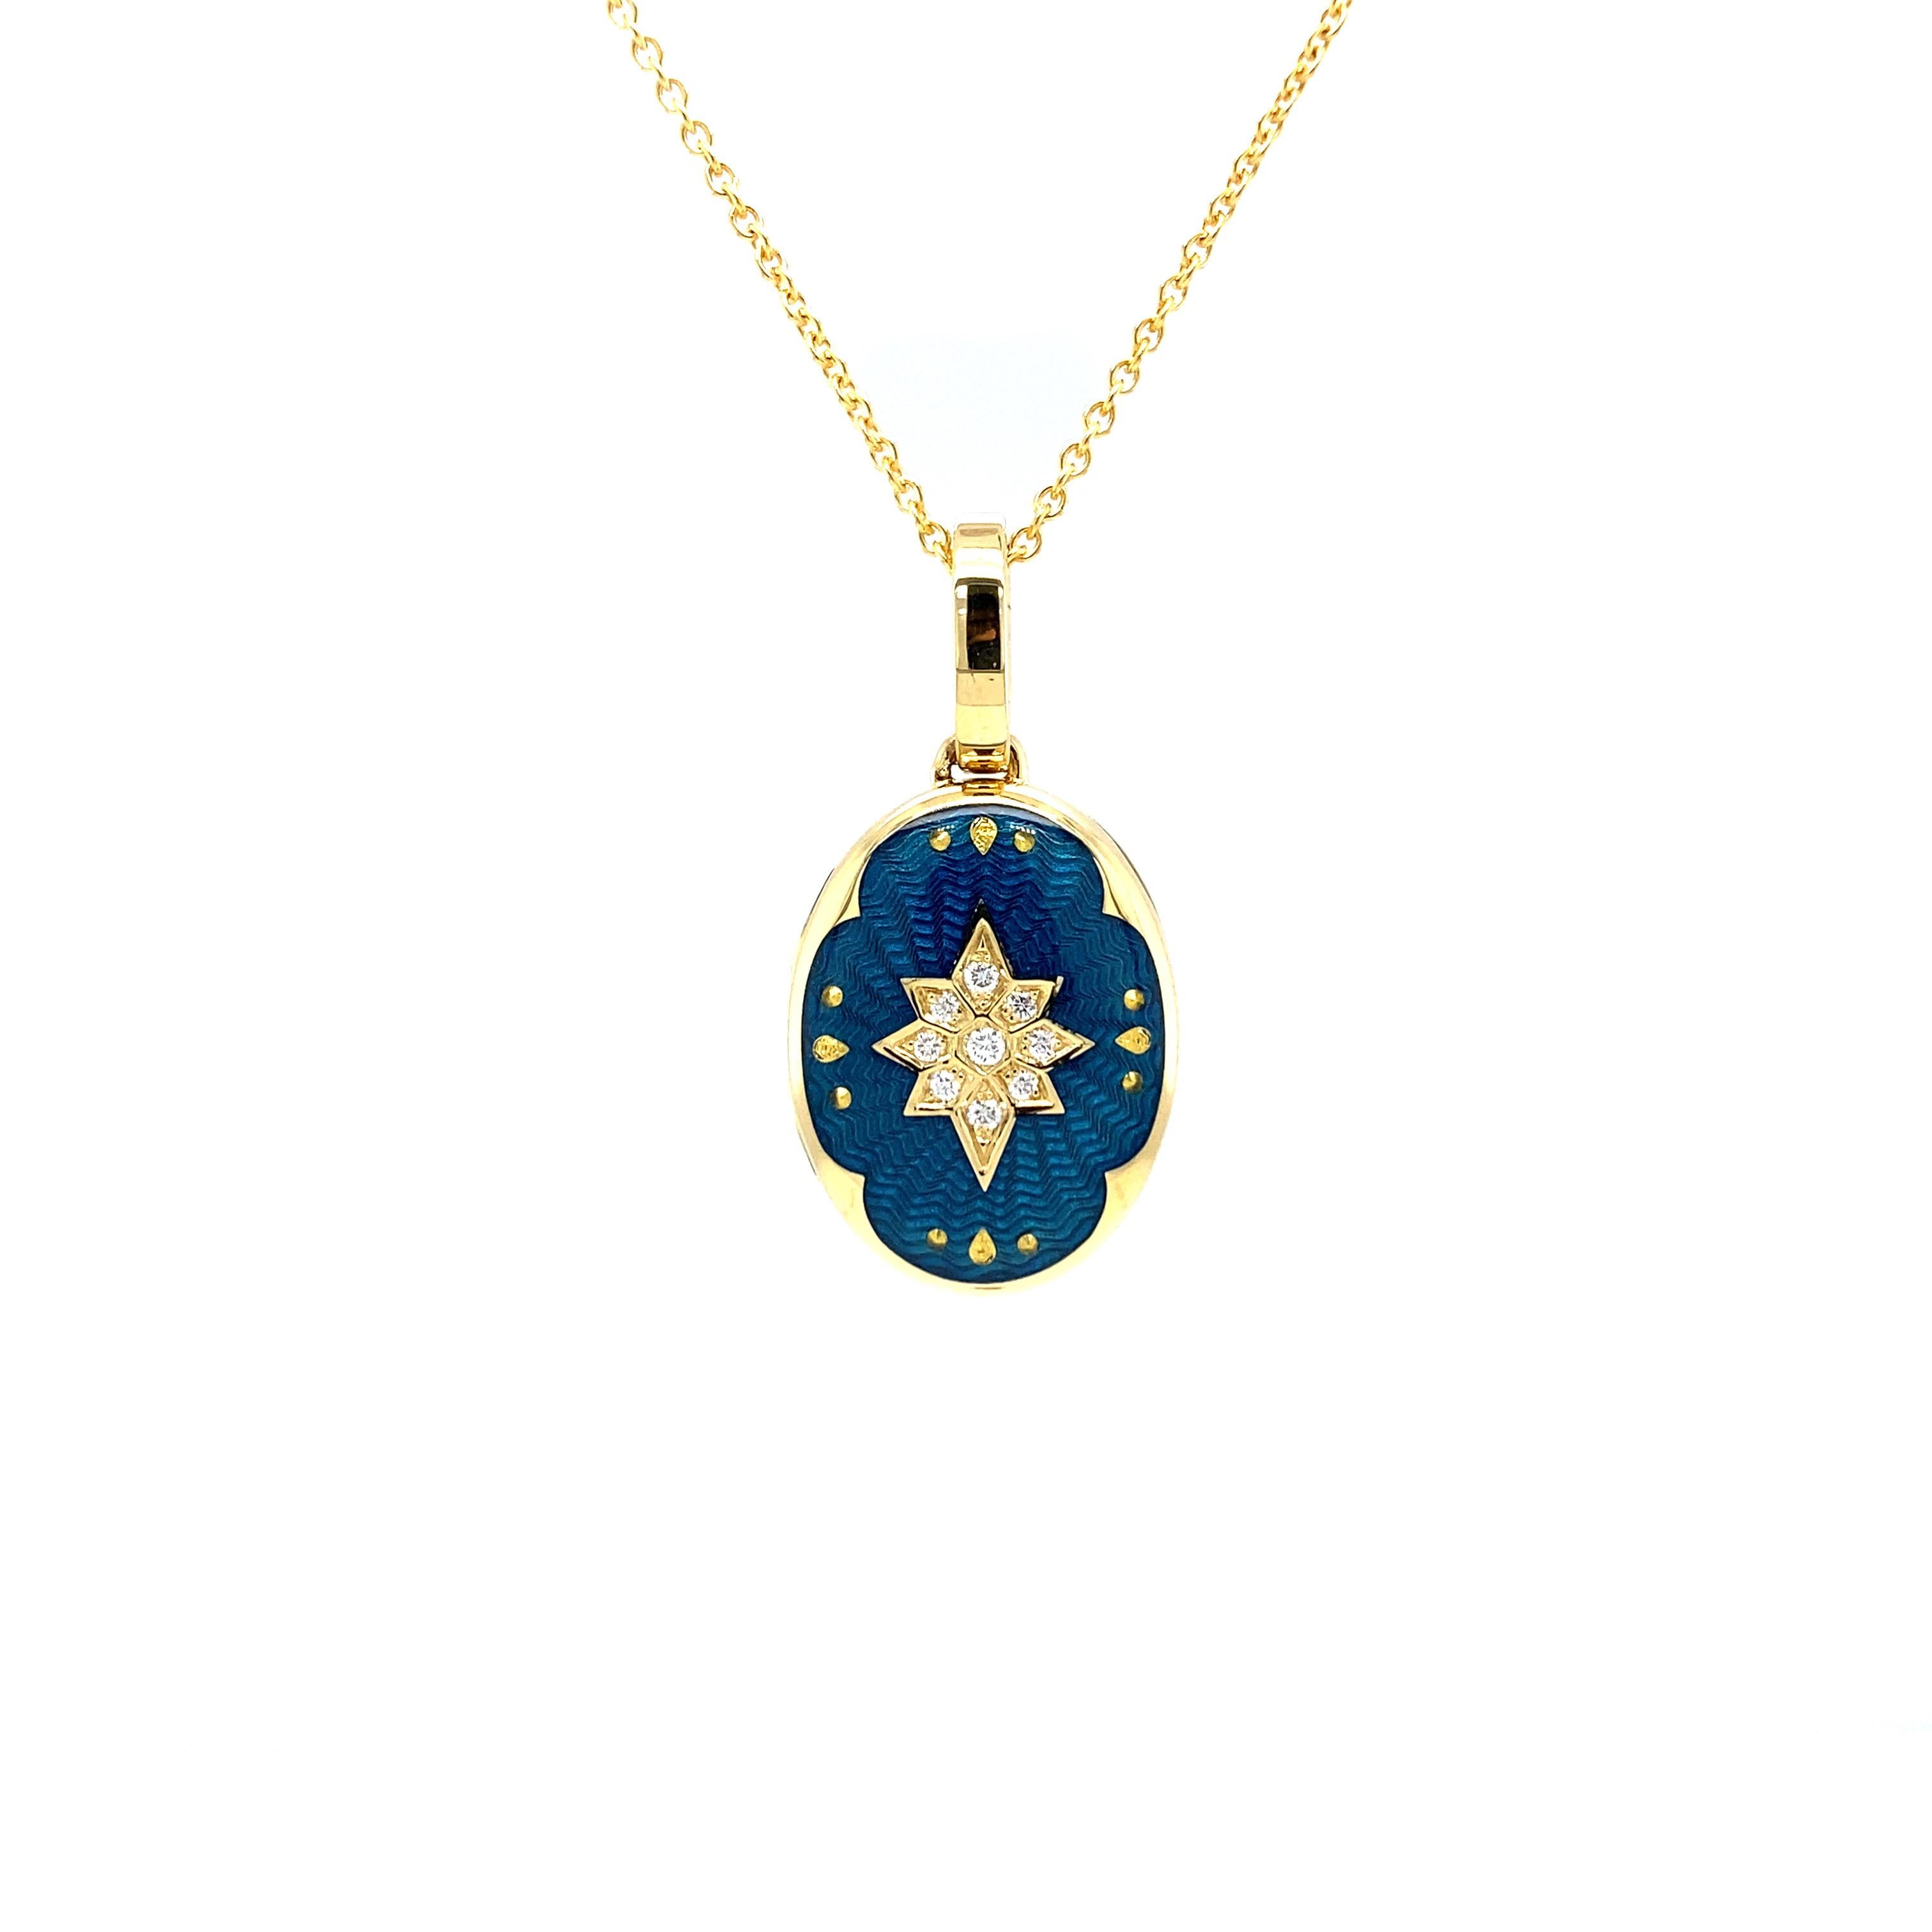 Victor Mayer oval locket pendant necklace 18k yellow gold, Victoria Collection, peacock blue vitreous enamel, 9 diamonds, total 0.07 ct, G VS, brilliant cut, measurements app. 20.0 mm x 15.0 mm

About the creator Victor Mayer
Victor Mayer is